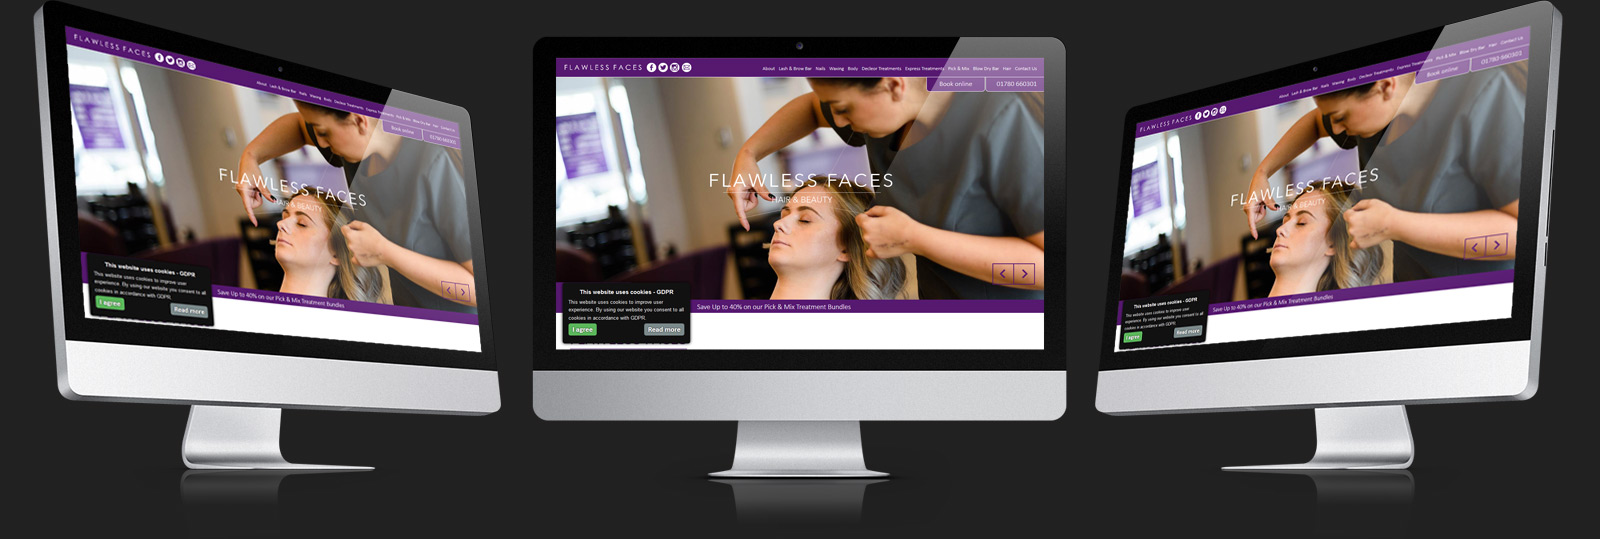 Stamford Web Design - Flawless Faces